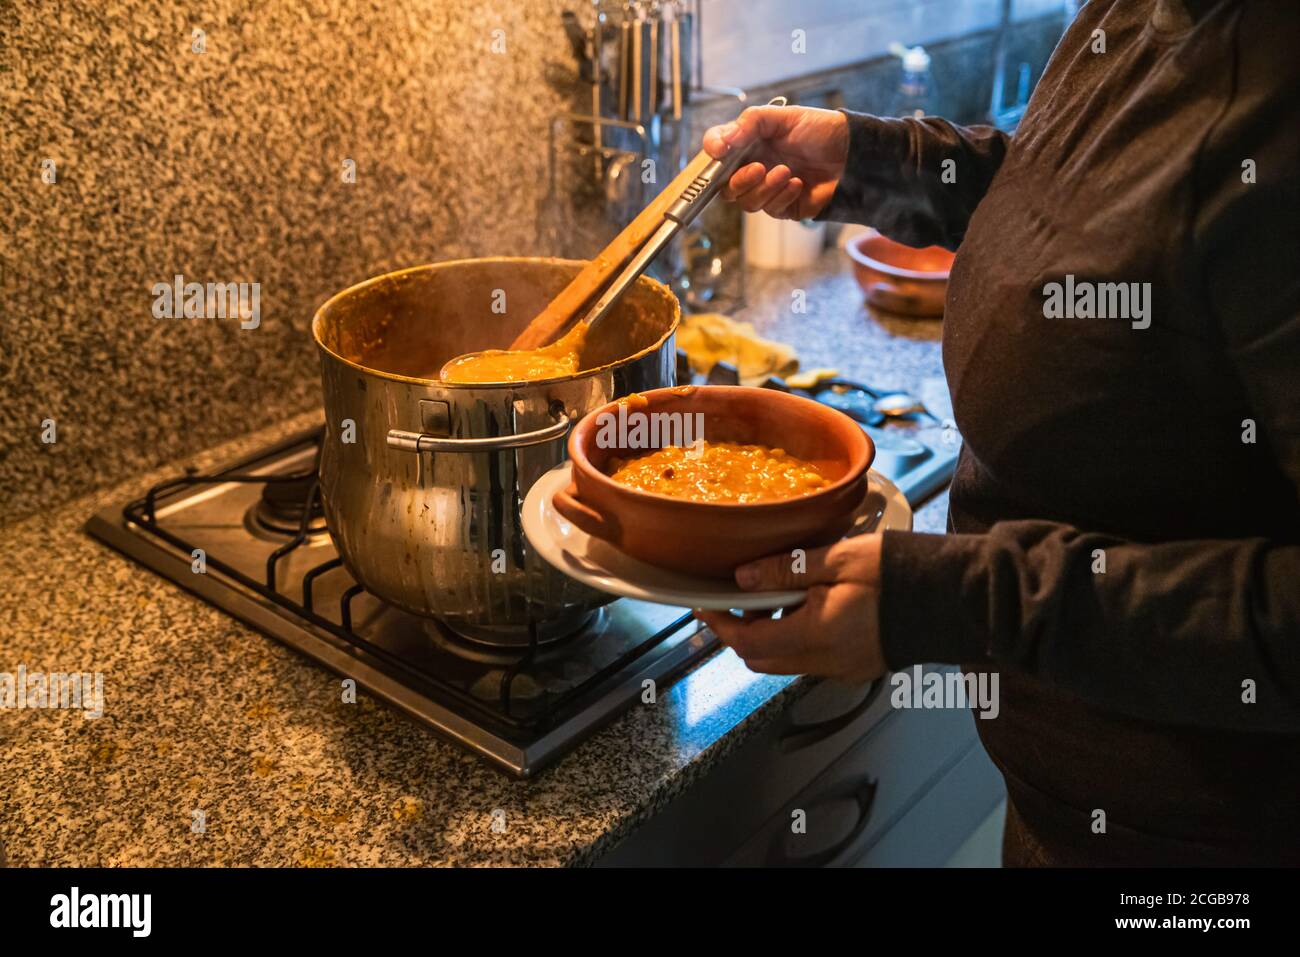 woman serving locro, typical Argentine food on handmade ceramic plates. Stock Photo